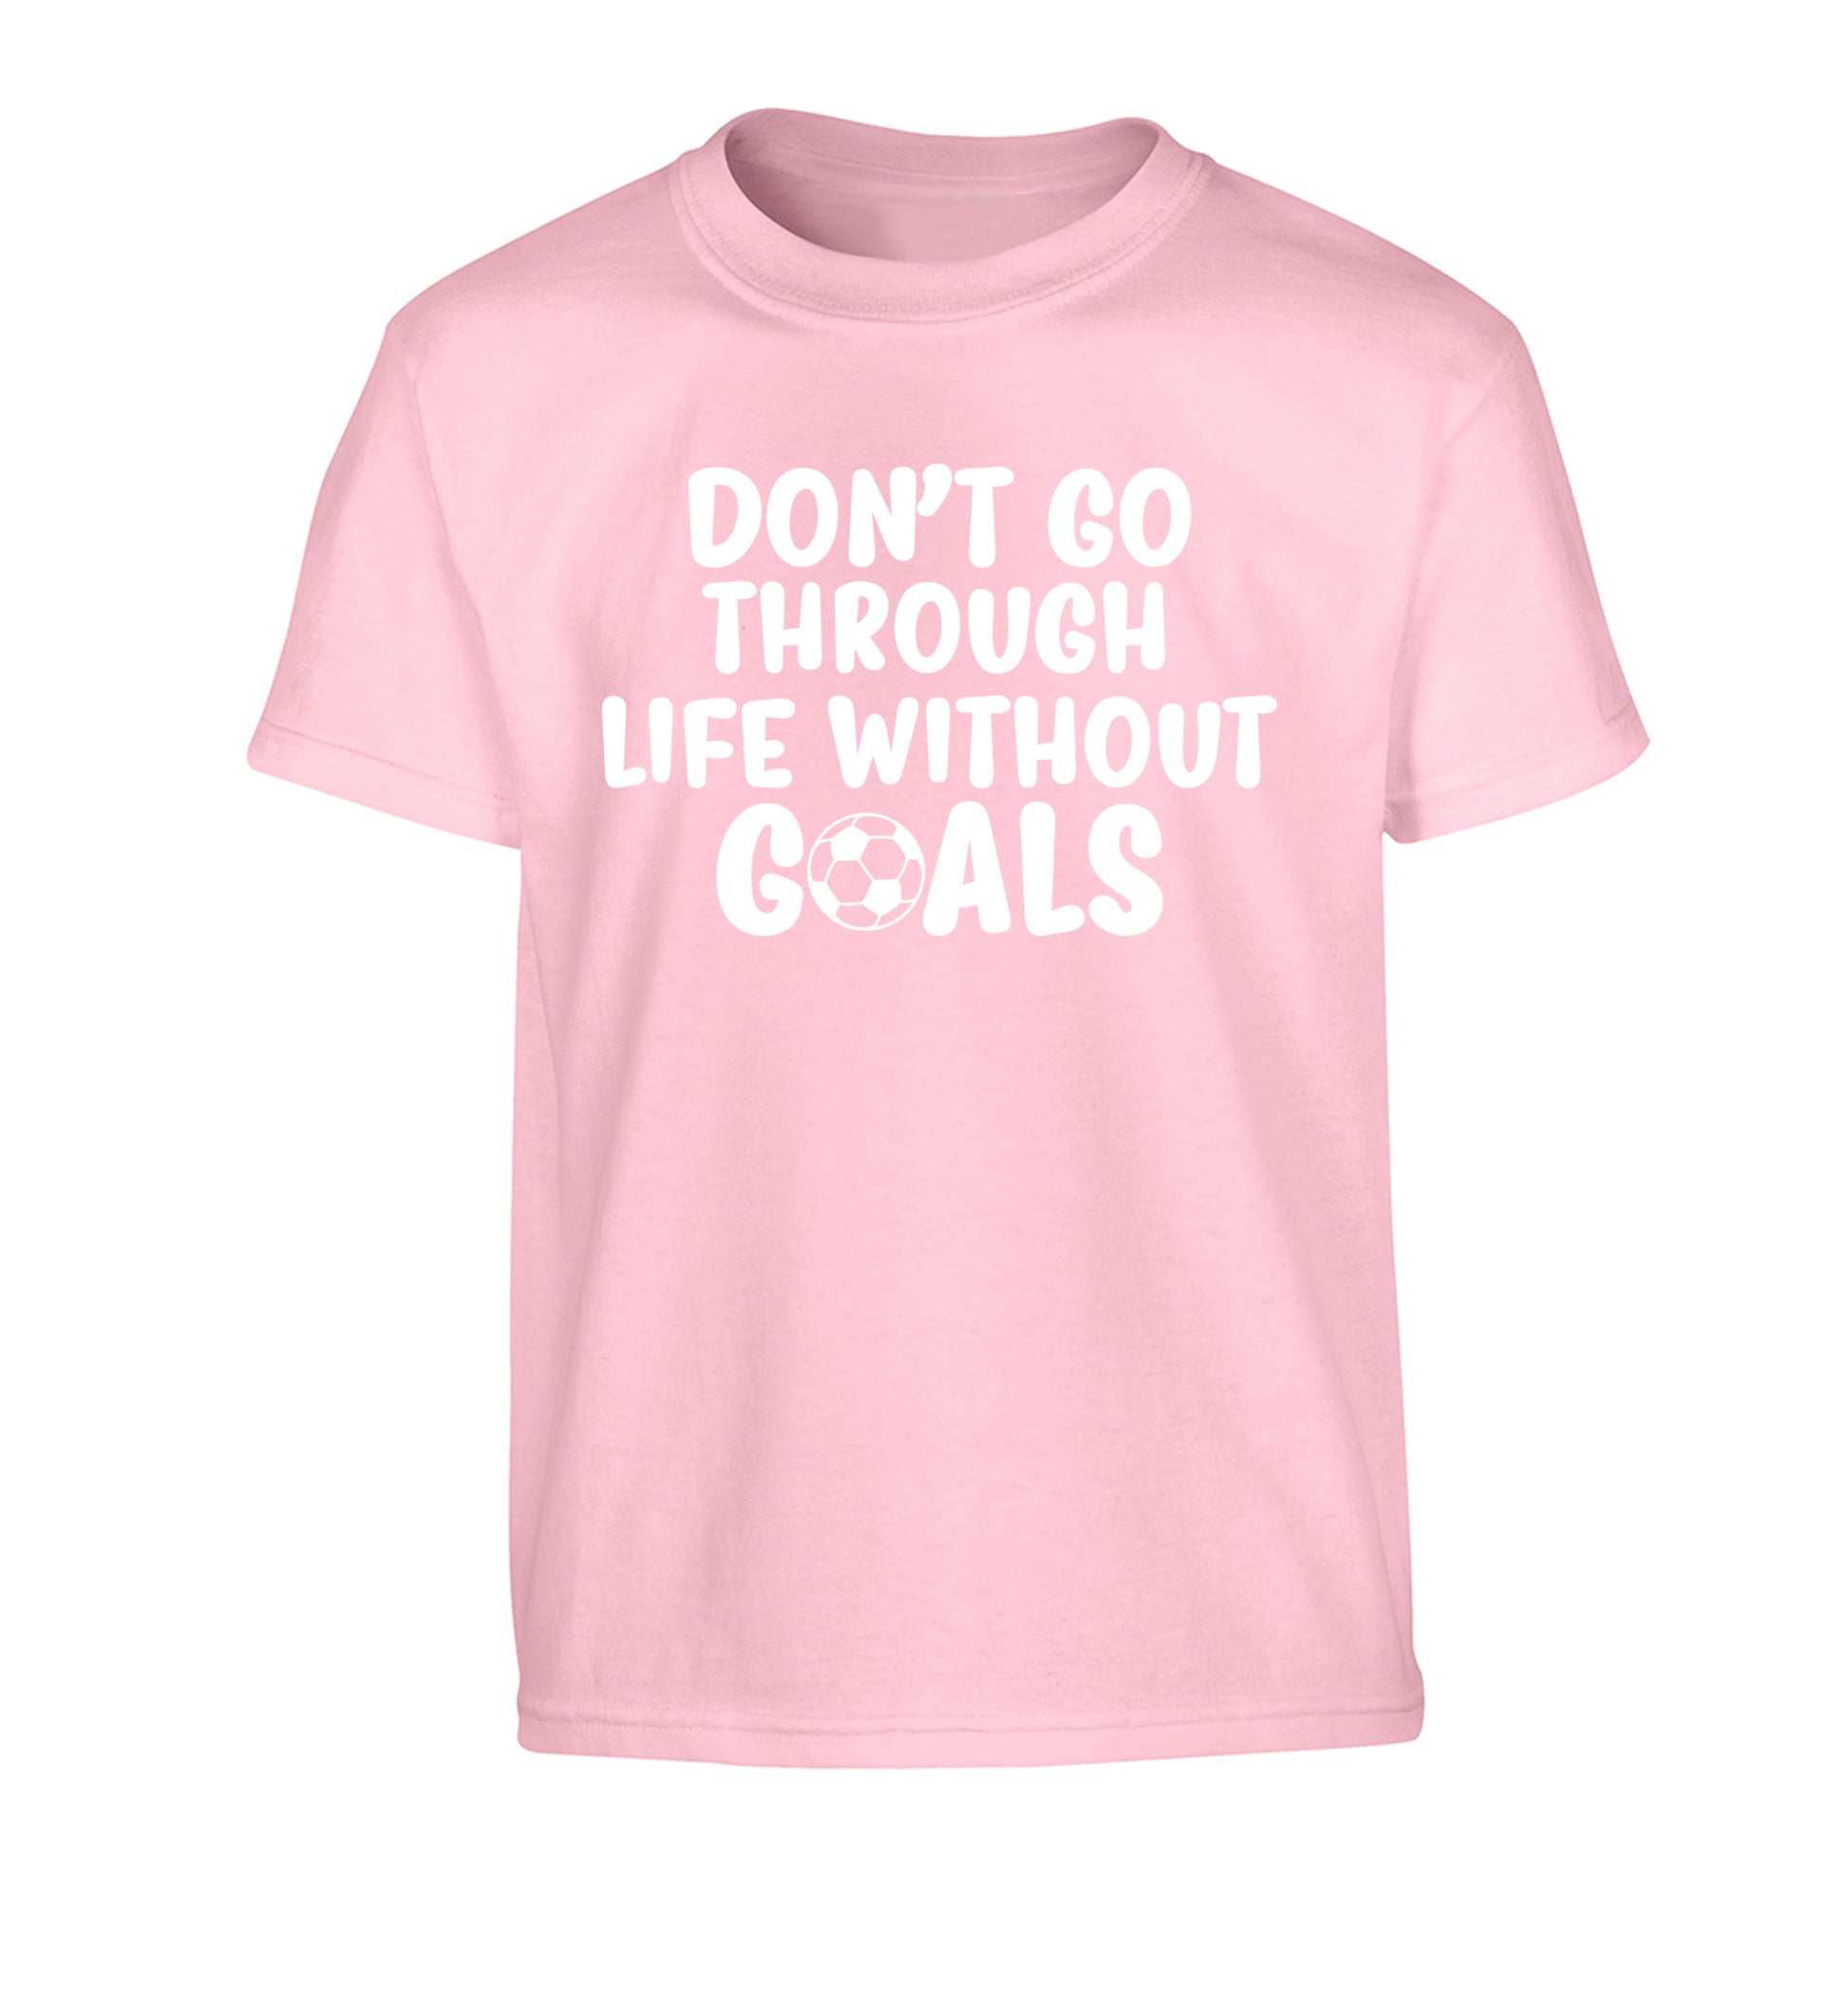 Don't go through life without goals Children's light pink Tshirt 12-14 Years